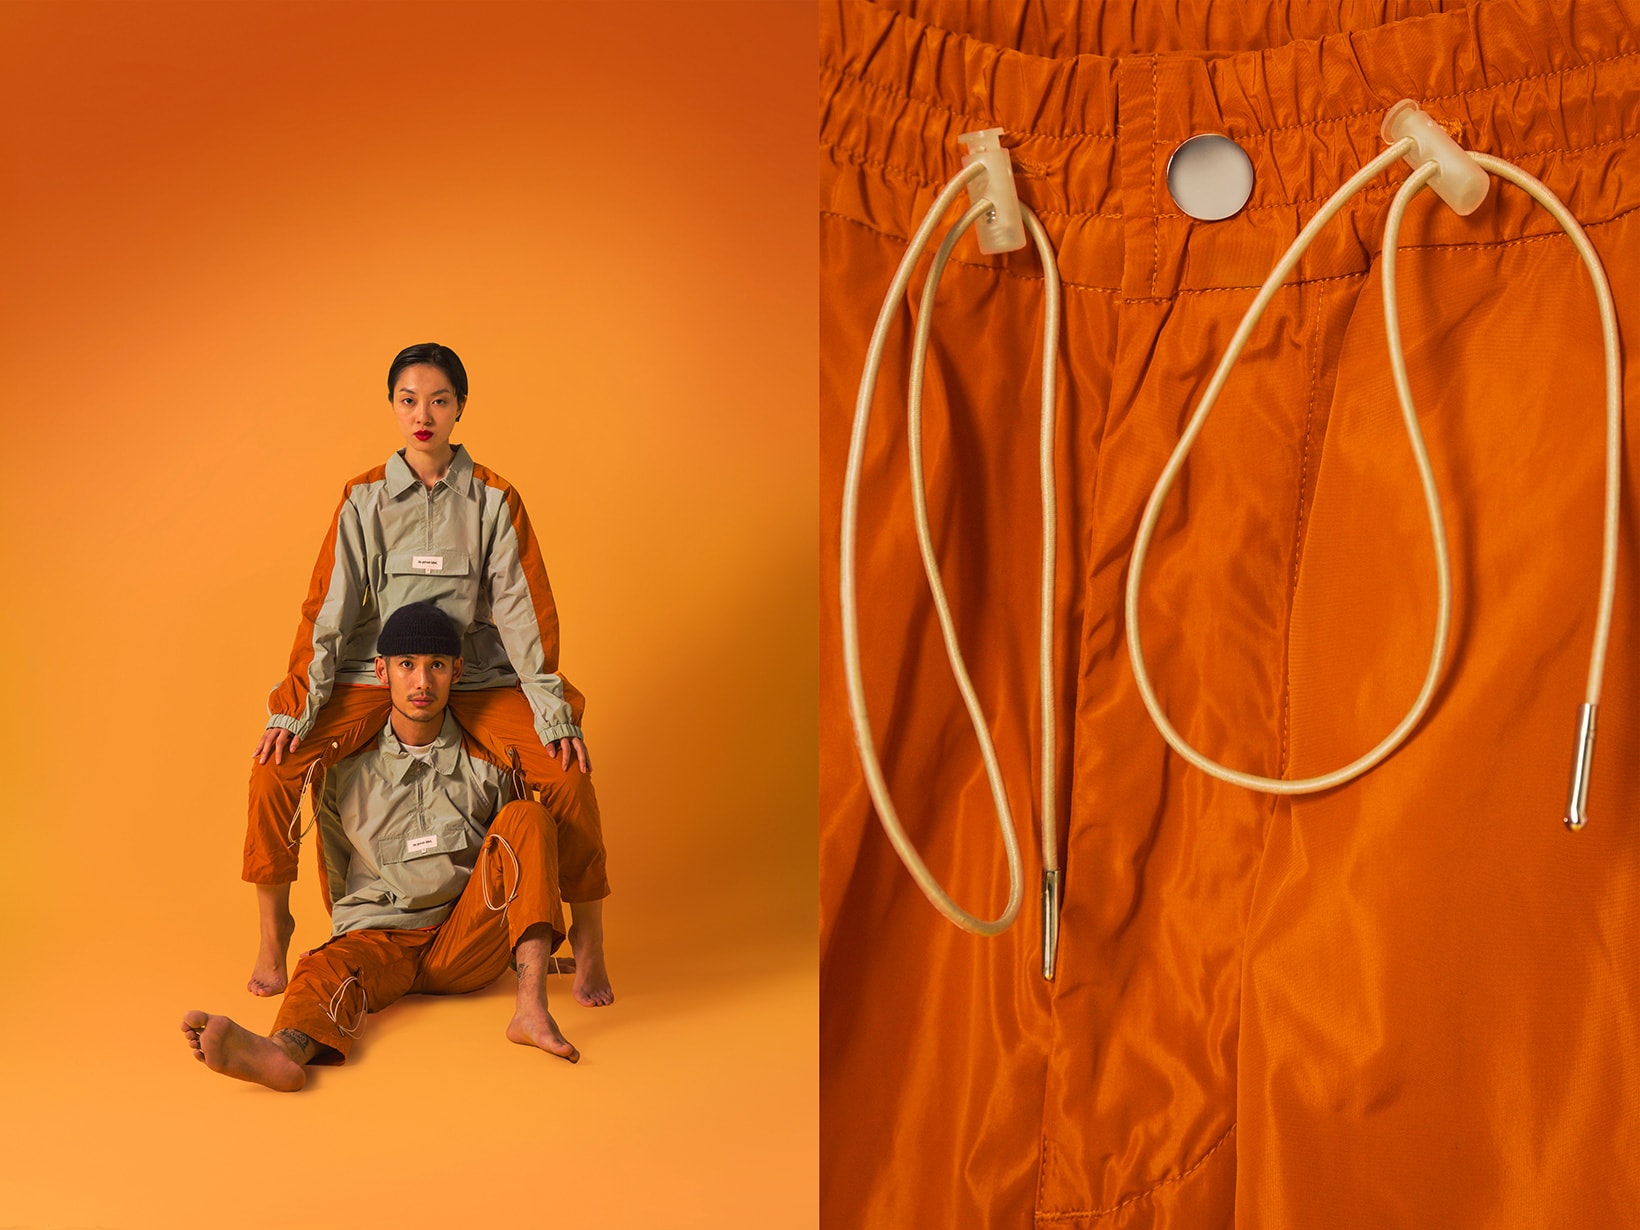 the private label collection 3 lookbook hong kong asian traditional garments mandarin buttons east meets west